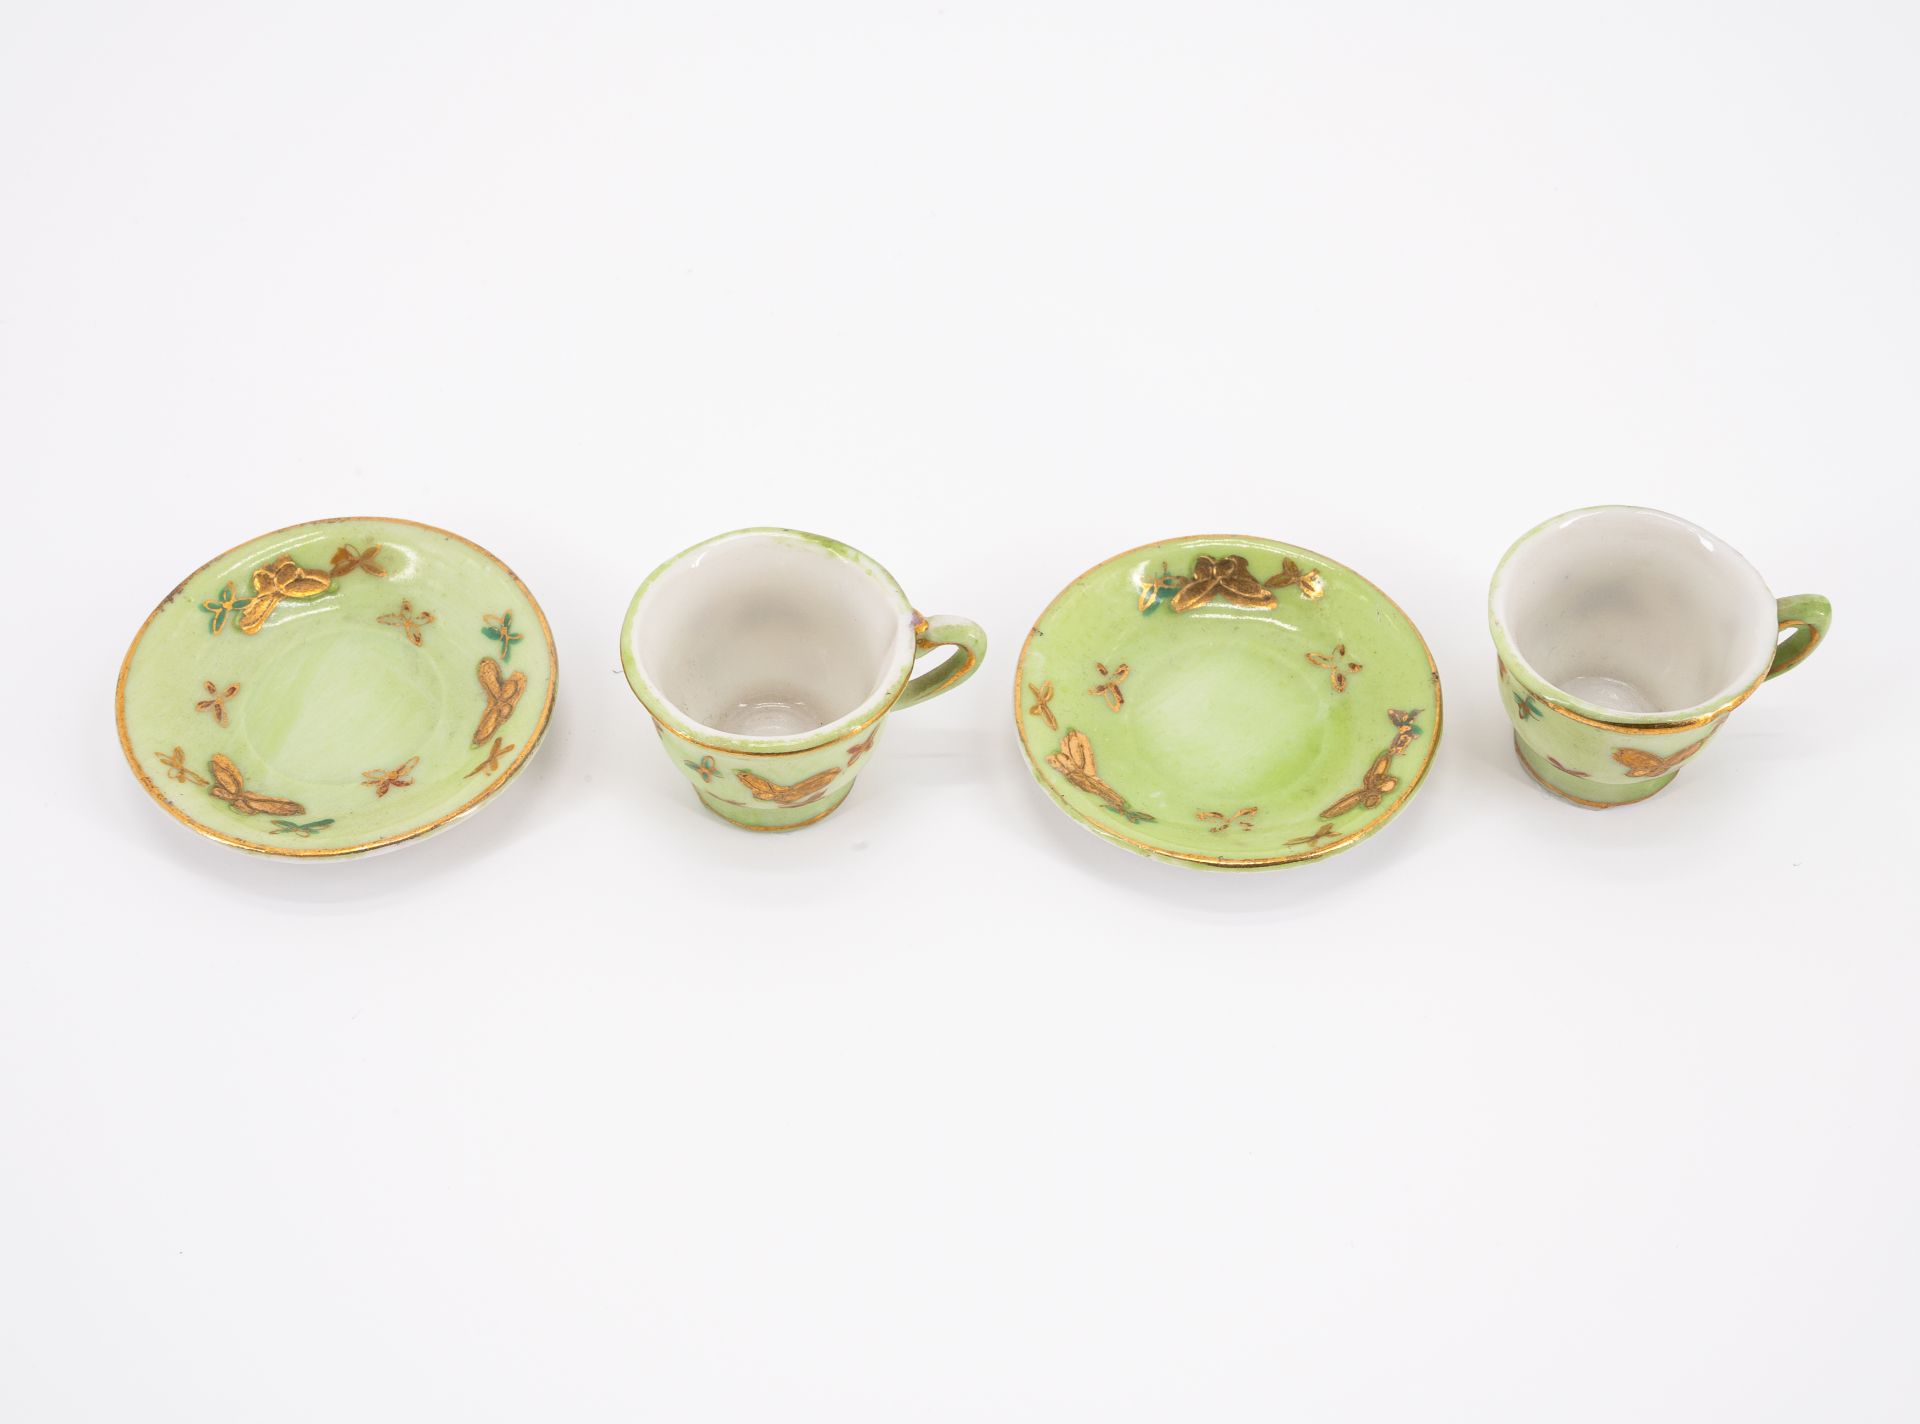 Germany: CERAMIC MINIATURE DINNER SERVICE AND PORCELAIN MINIATURE TEASERVICE - Image 10 of 16